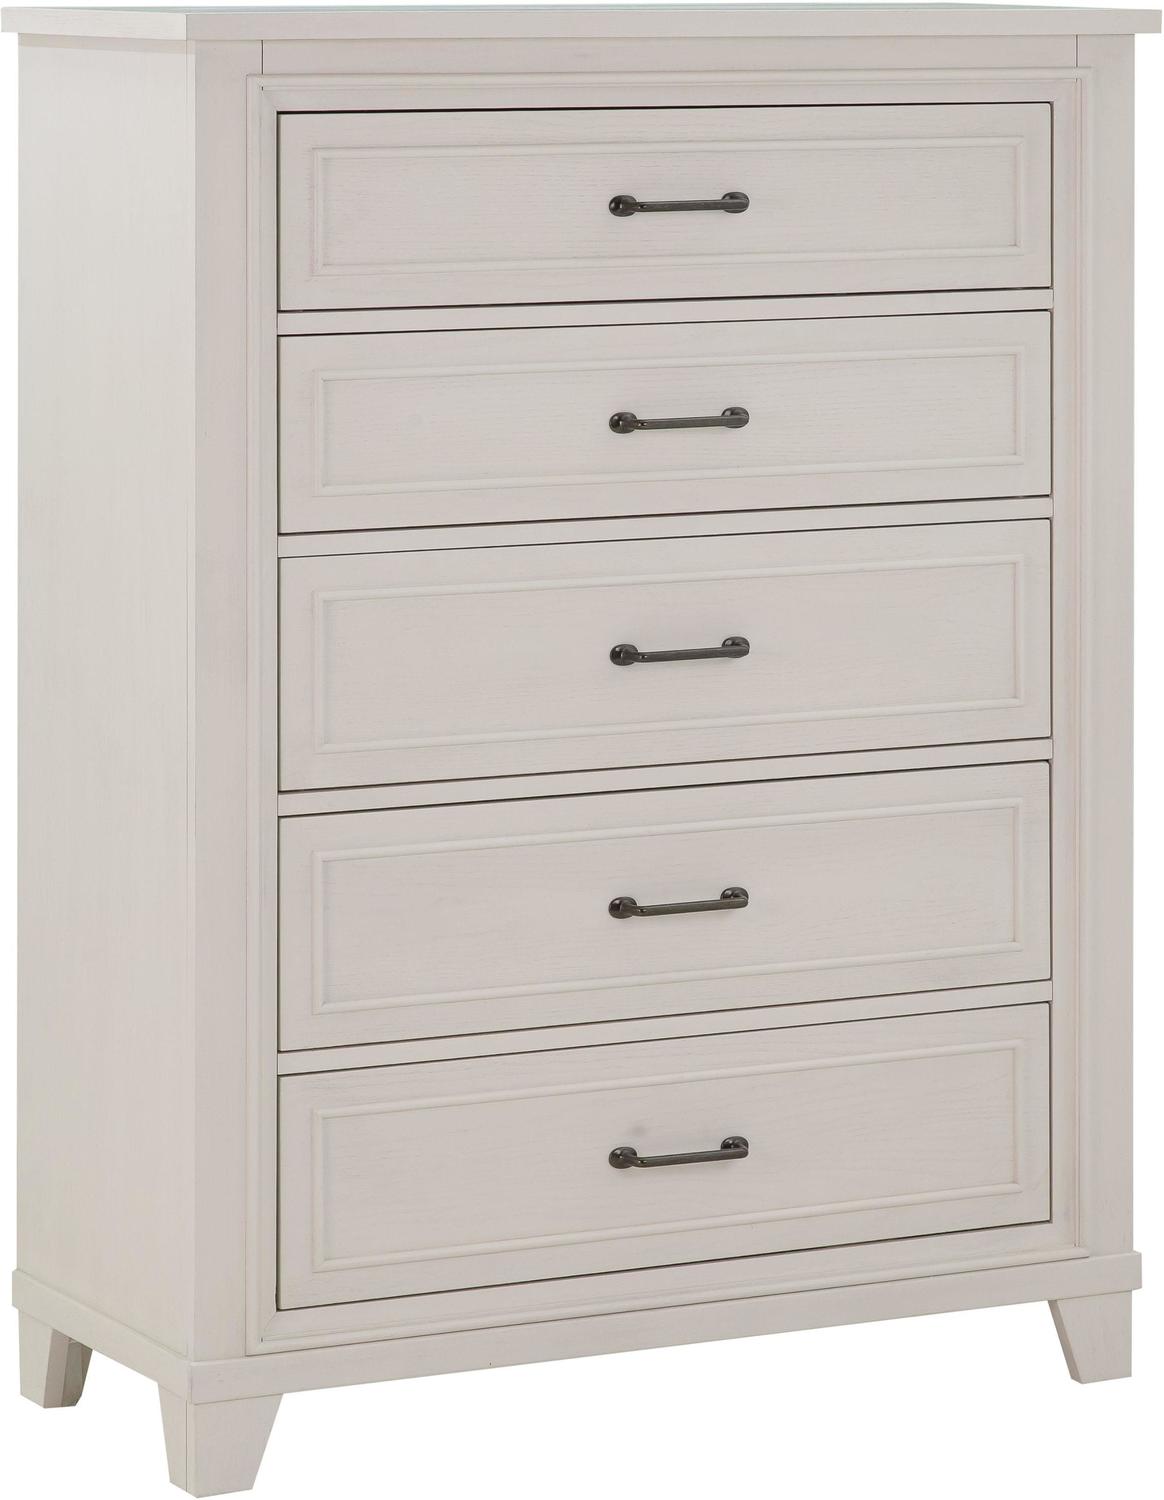 wooden 2 door cabinet Contemporary Design Furniture Chests White